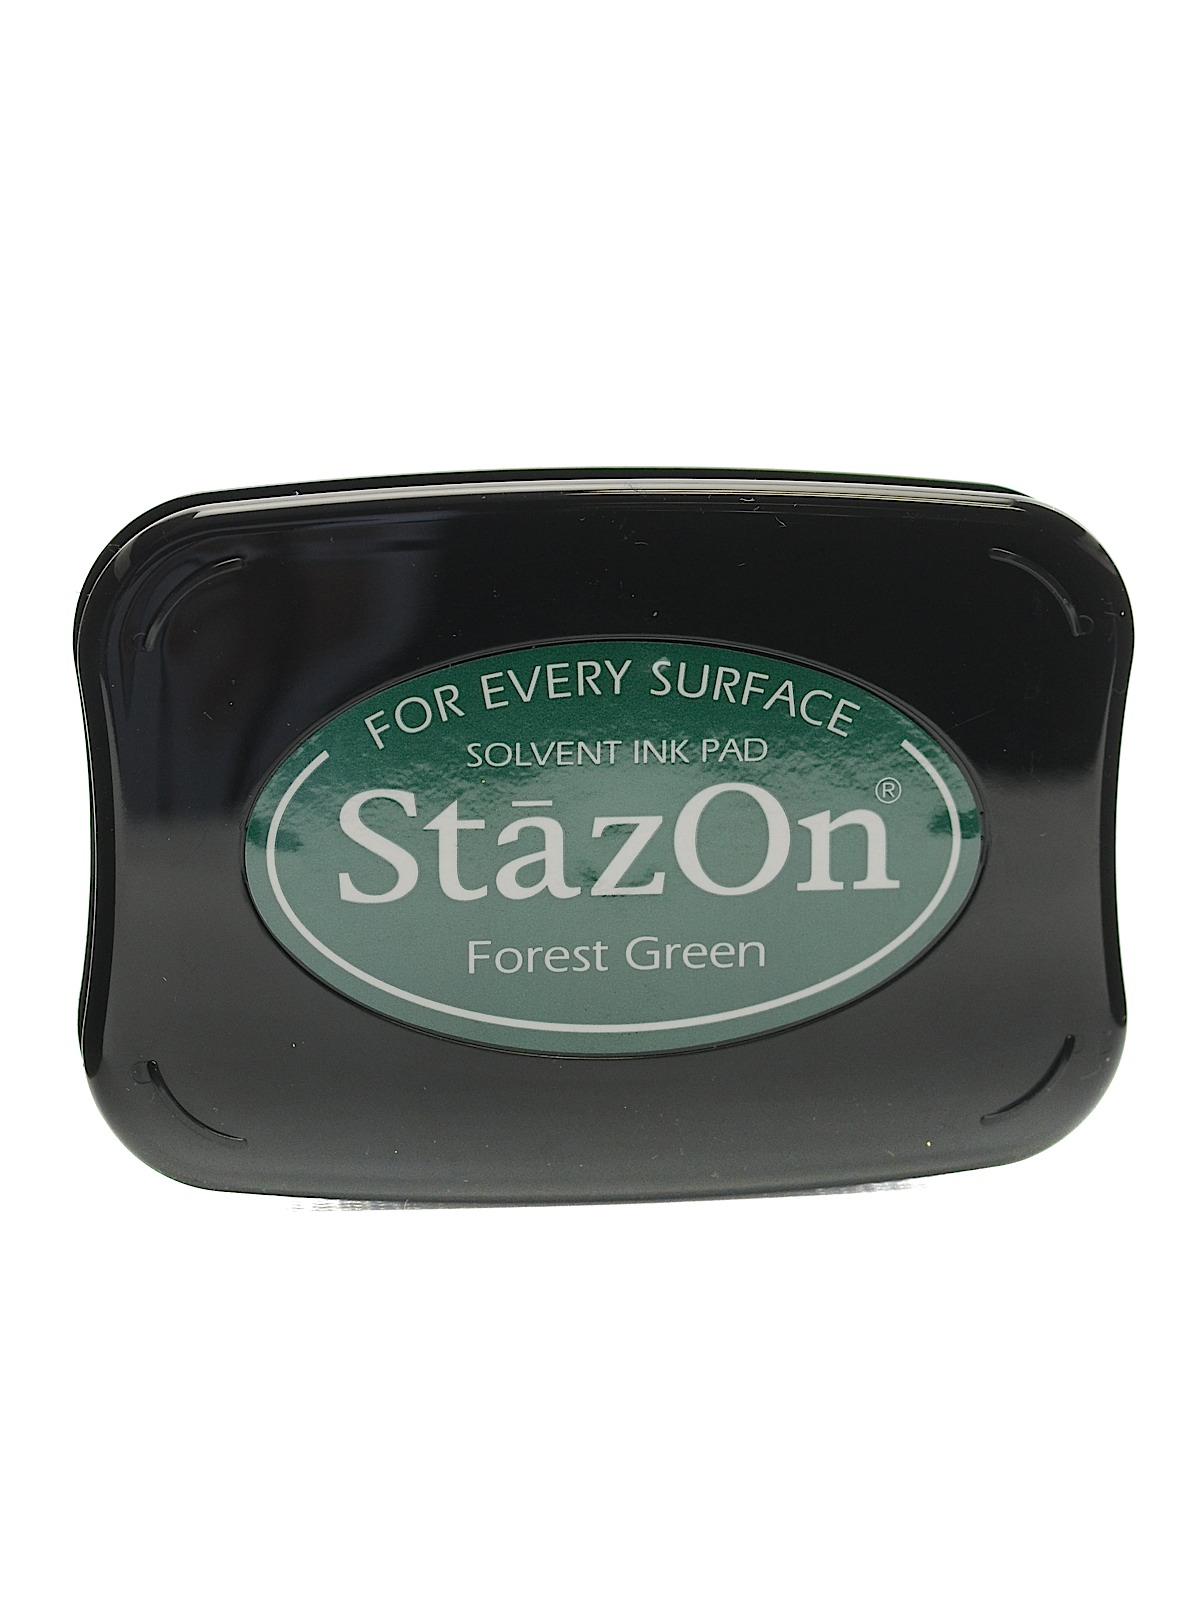 Stazon Solvent Ink Forest Green 3.75 In. X 2.625 In. Full-size Pad